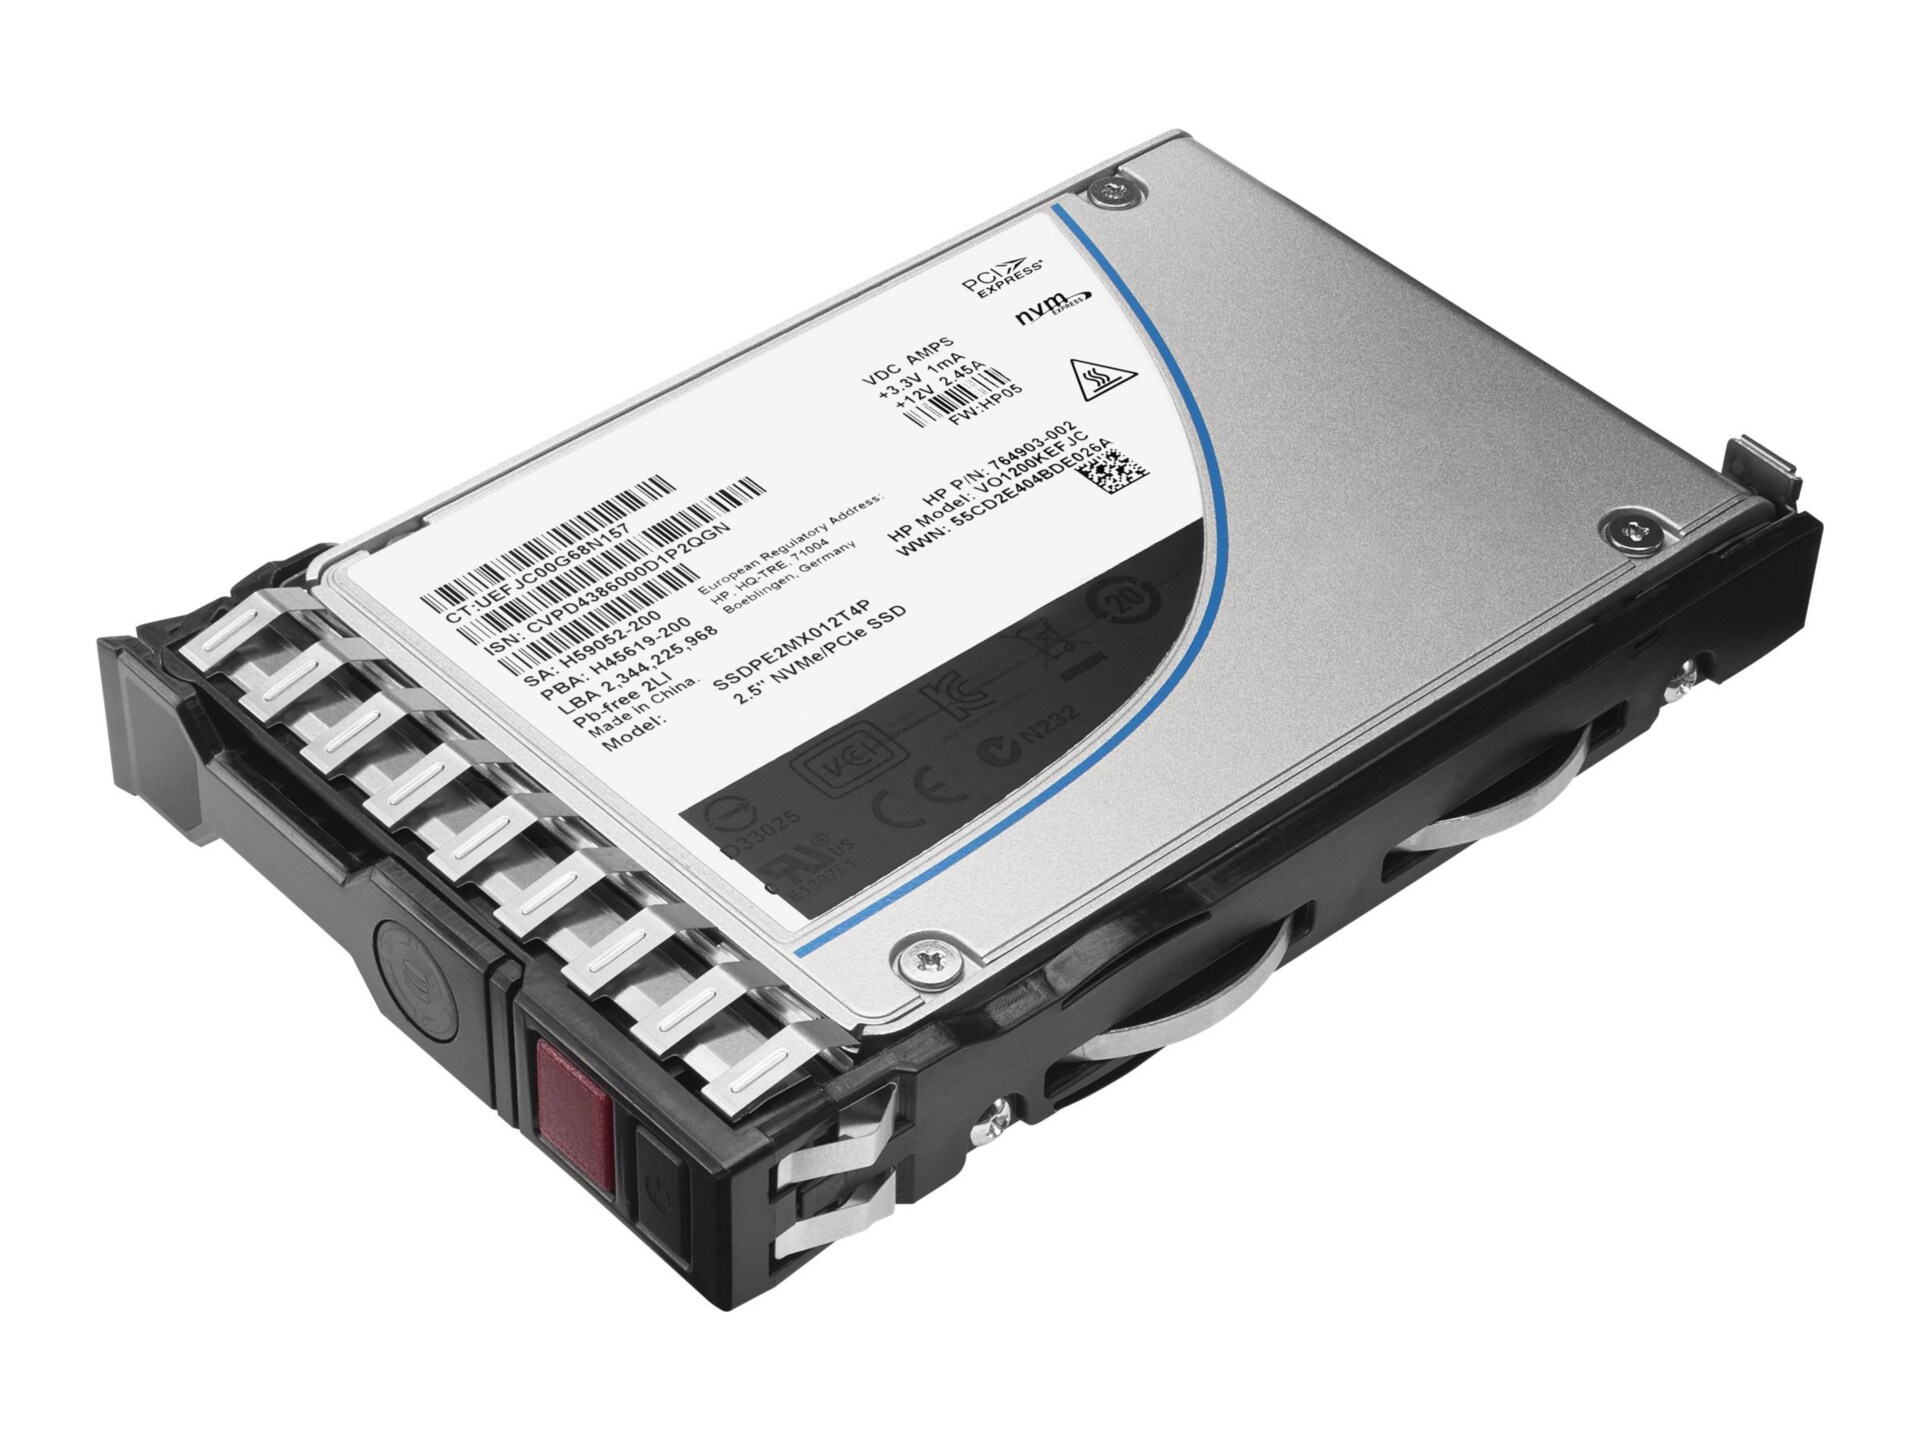 HPE Read Intensive-3 - solid state drive - 120 GB - SATA 6Gb/s